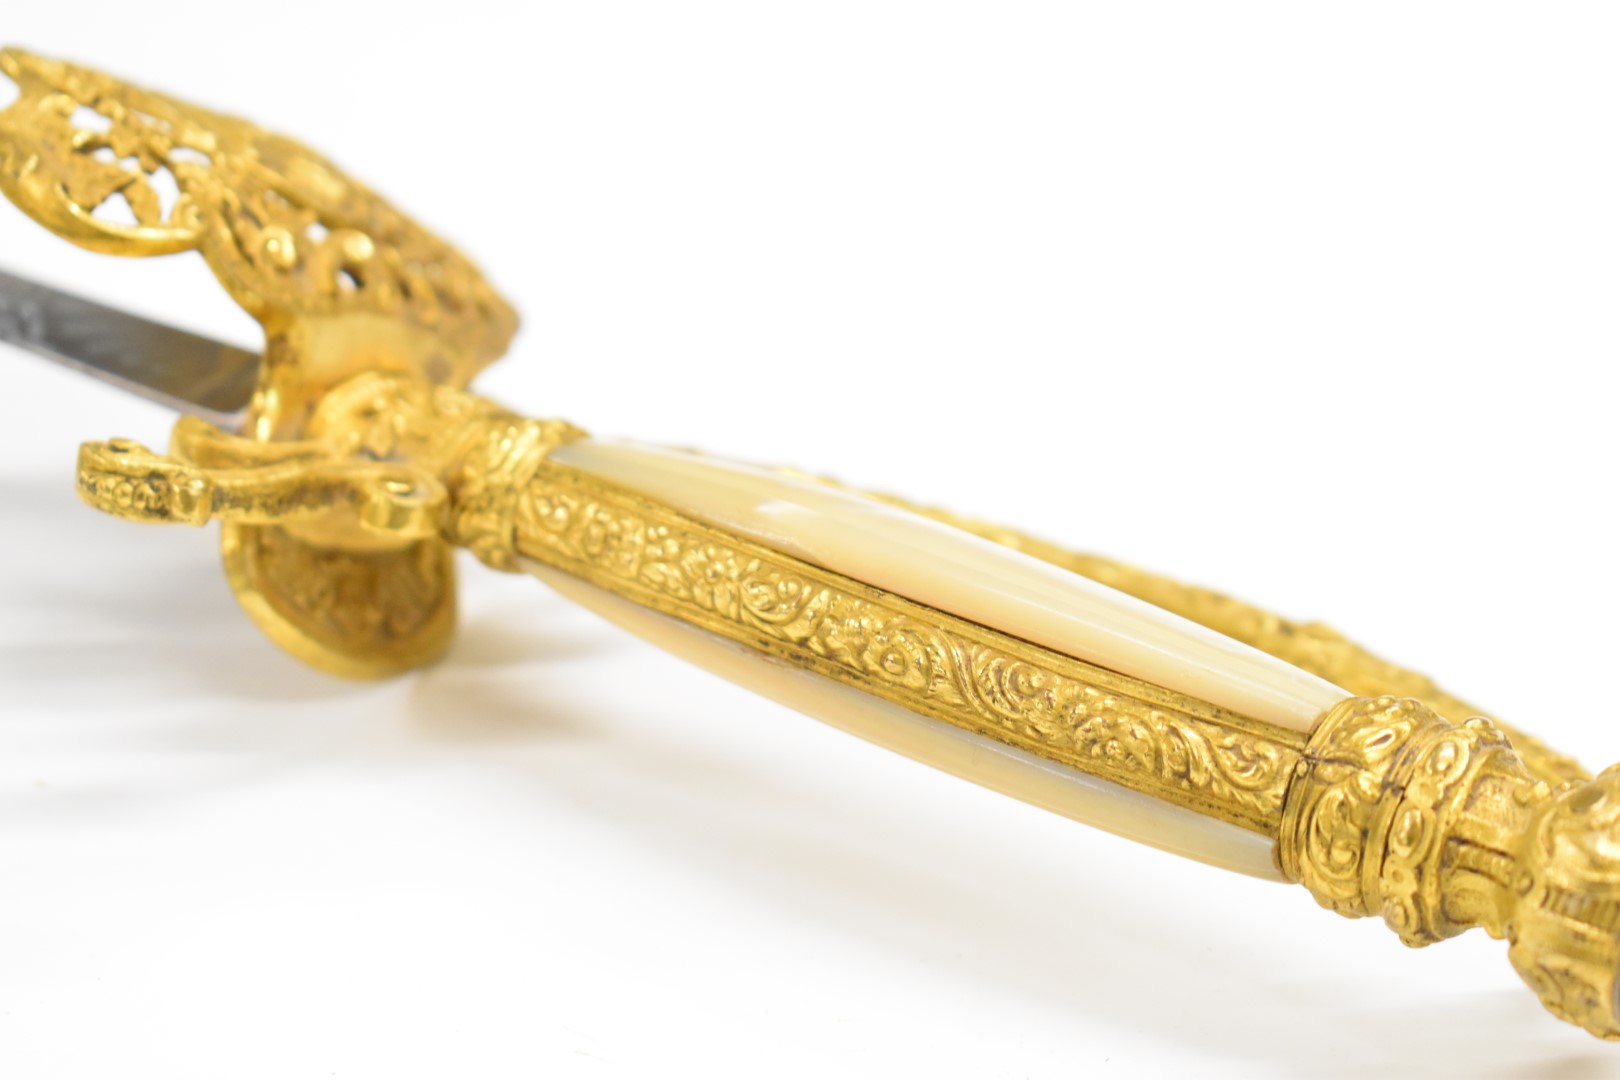 French made court sword retailed by Maria 14 Rue de Septembre Paris with gilt decorated hilt and - Image 7 of 11